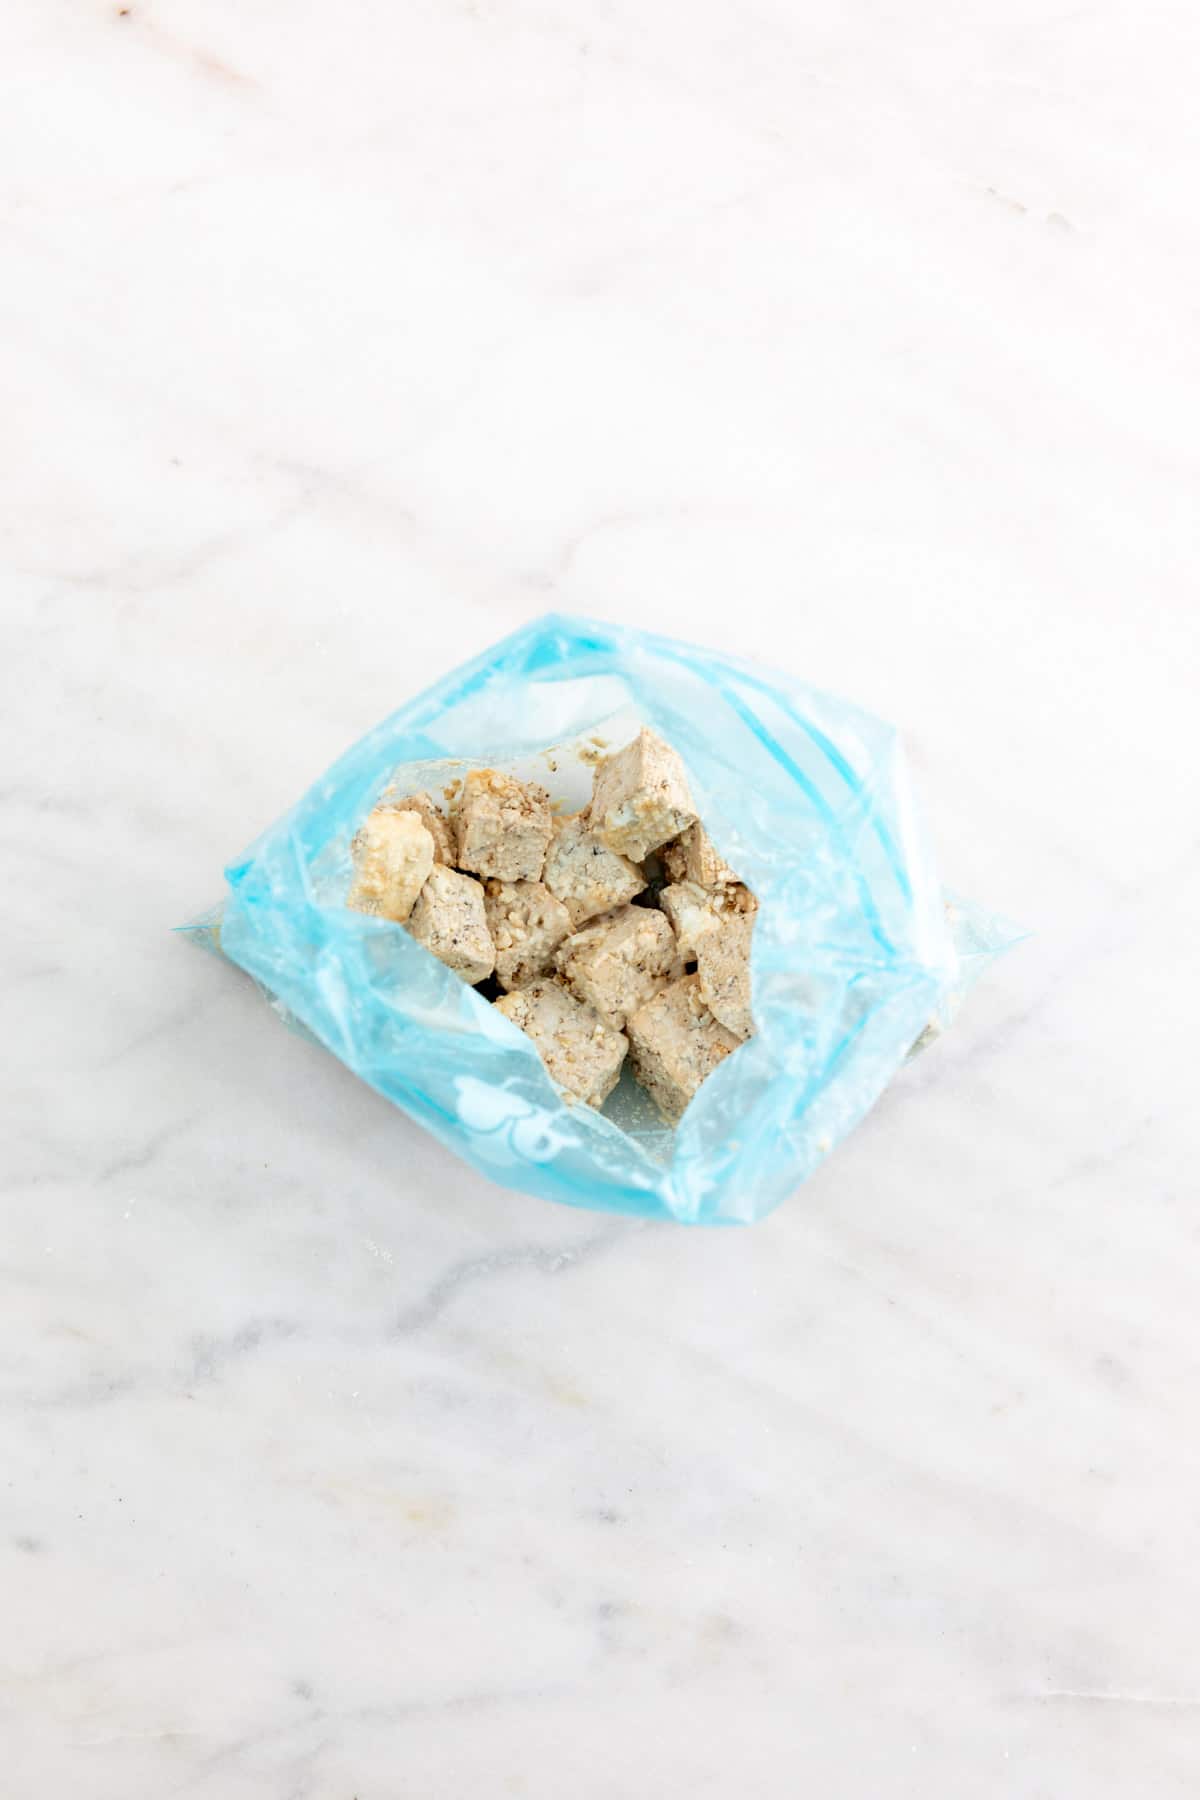 Tofu cubes in a freezer bag already mixed with the cornstarch.